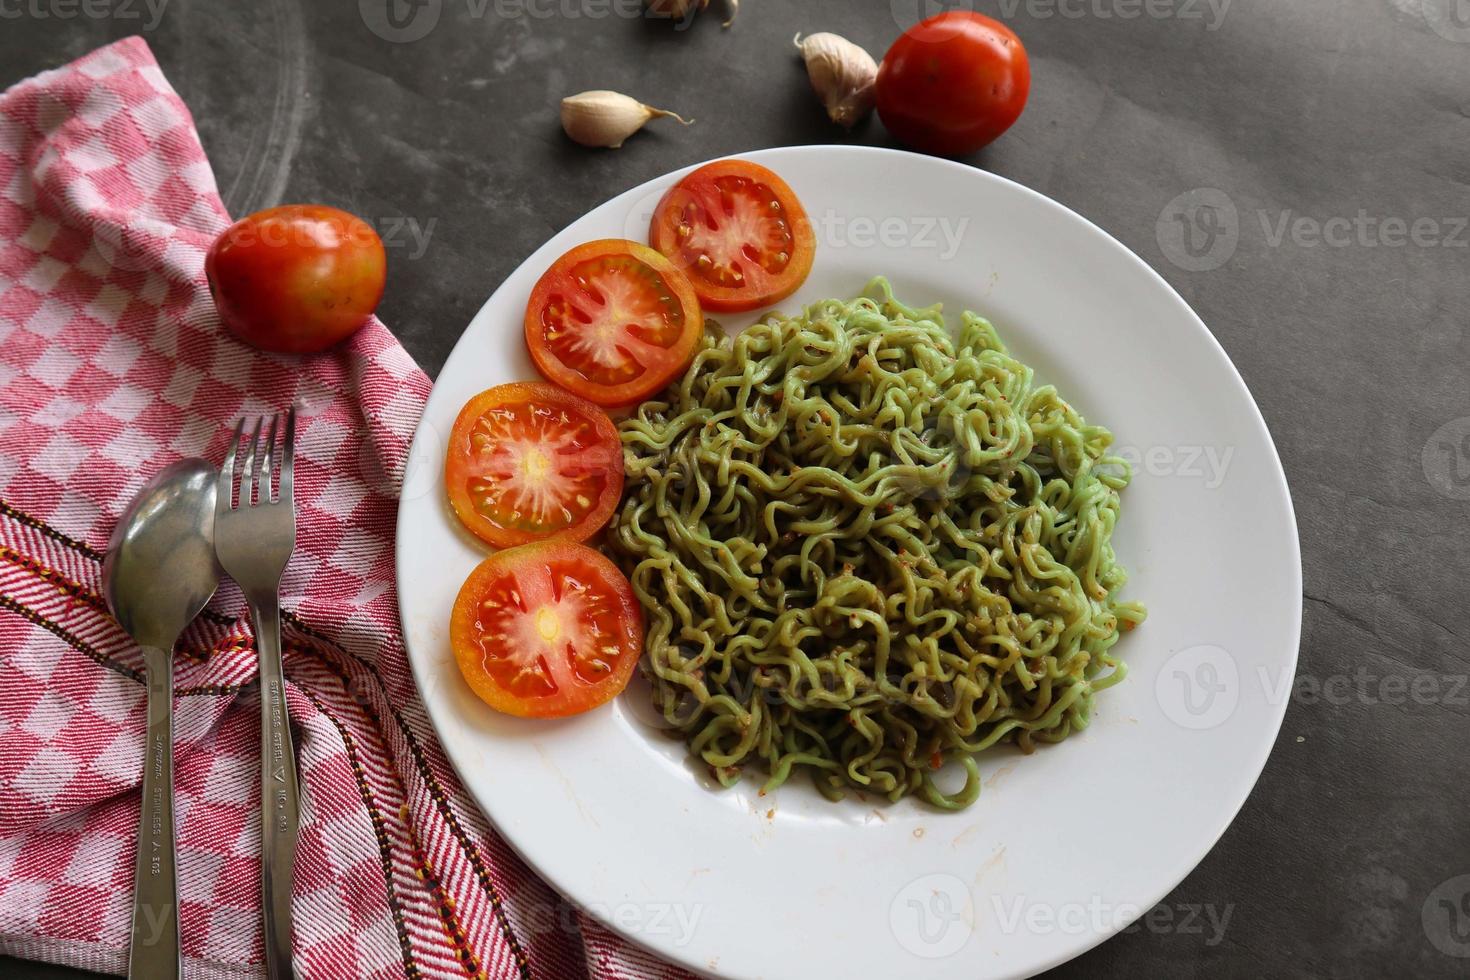 green noodles, or Spinach pasta , Zucchini raw vegan pasta dip, and tomatoes on plate. photo